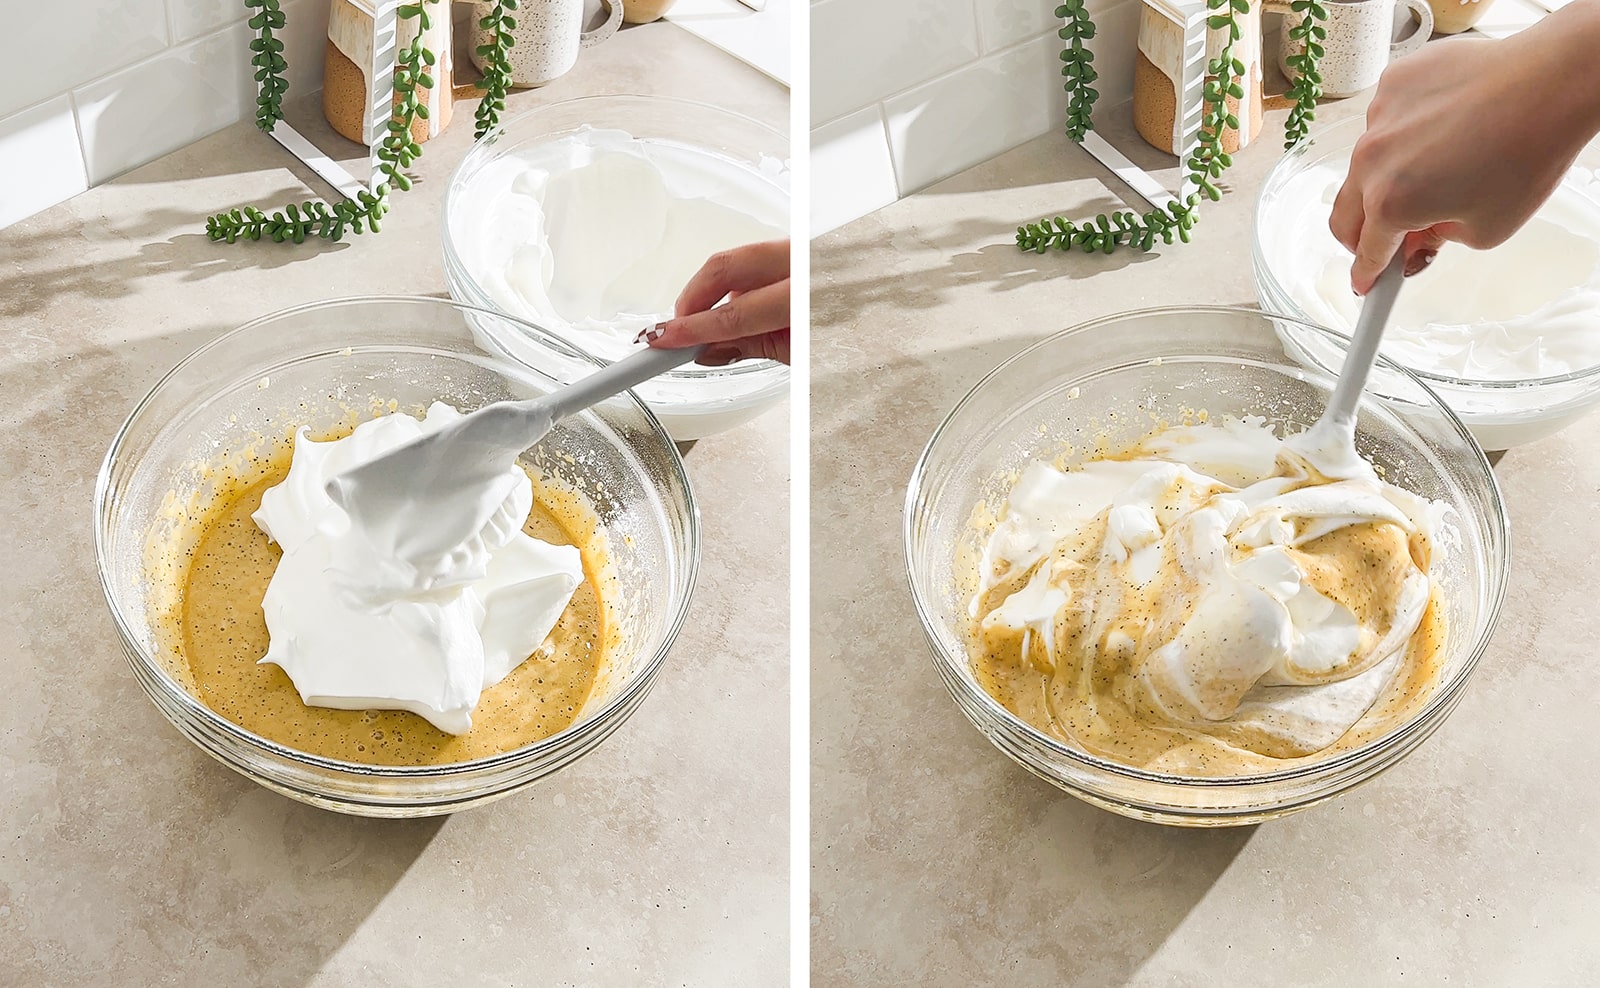 Left to right: dropping meringue from a spatula into bowl of batter, folding meringue and batter together with spatula.